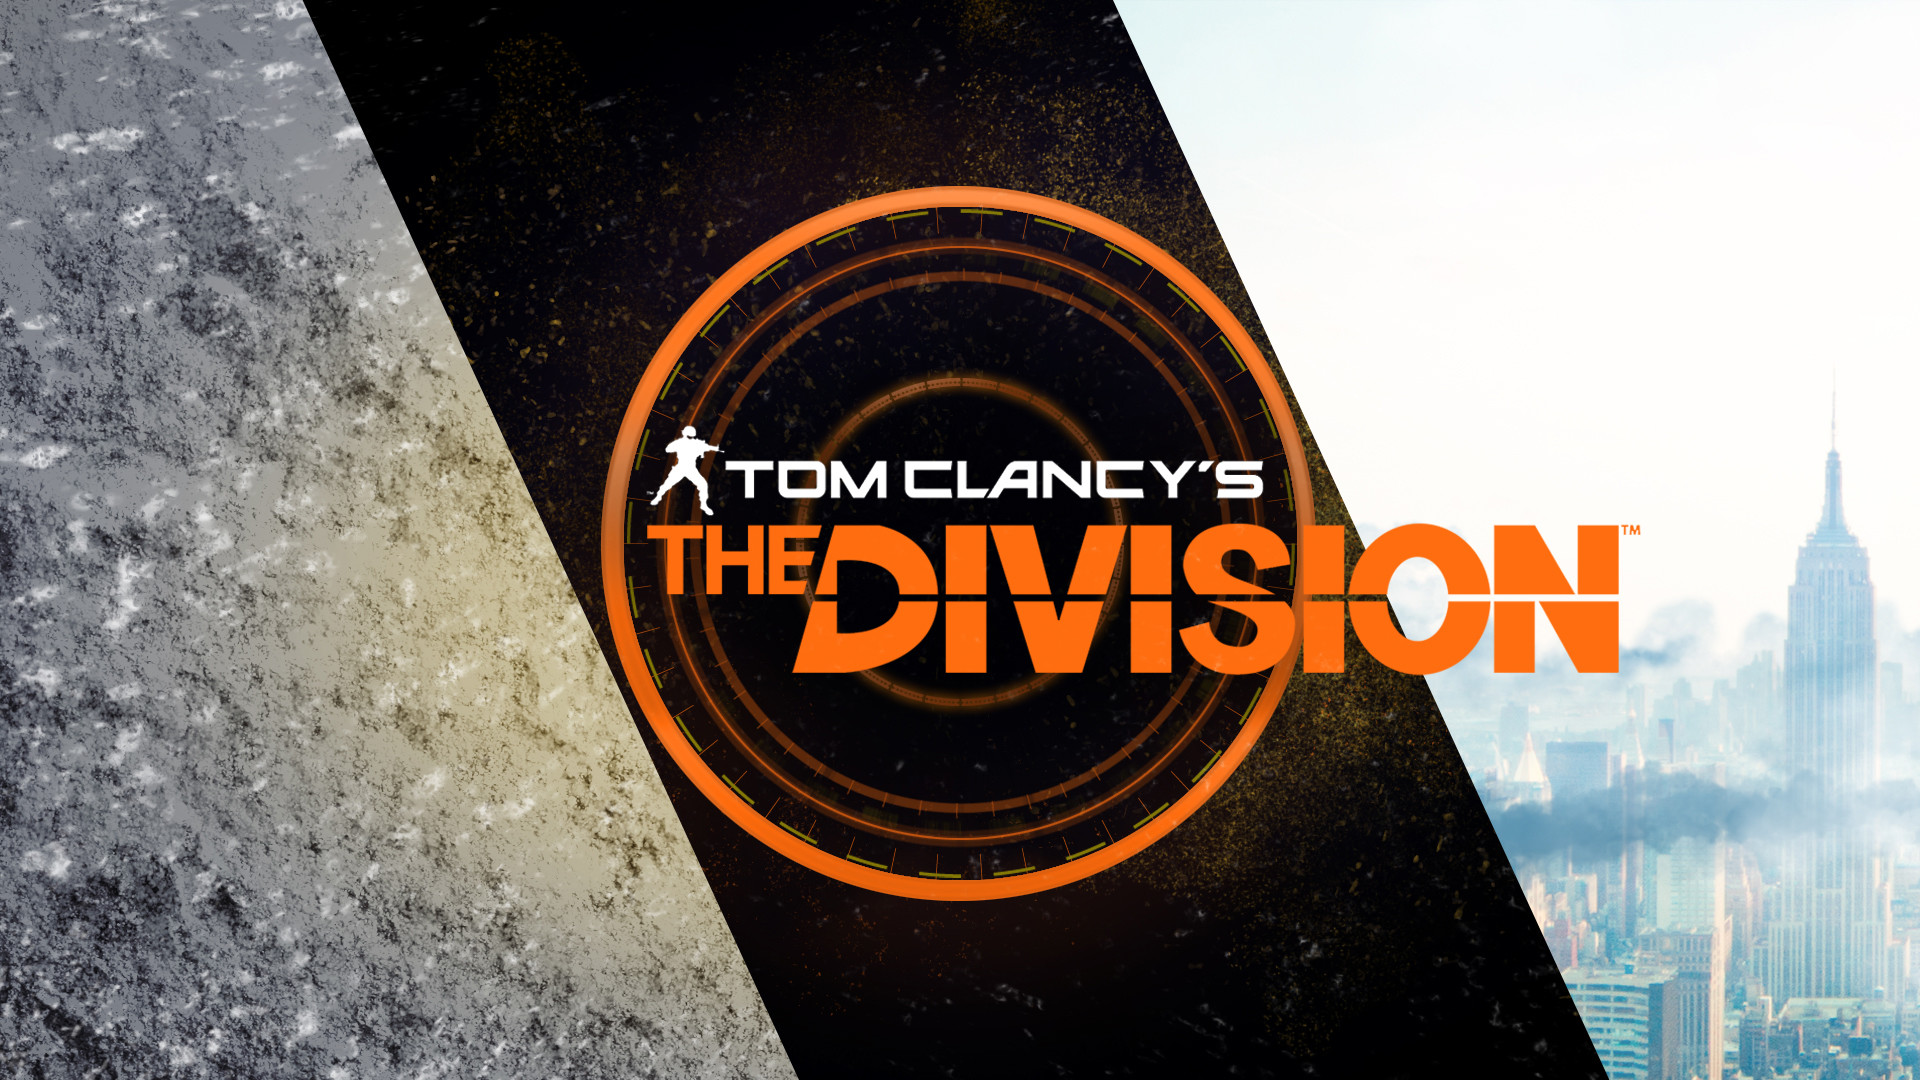 1920x1080 ... Tom Clancy's The Division Wallpaper Pack by ValencyGraphics